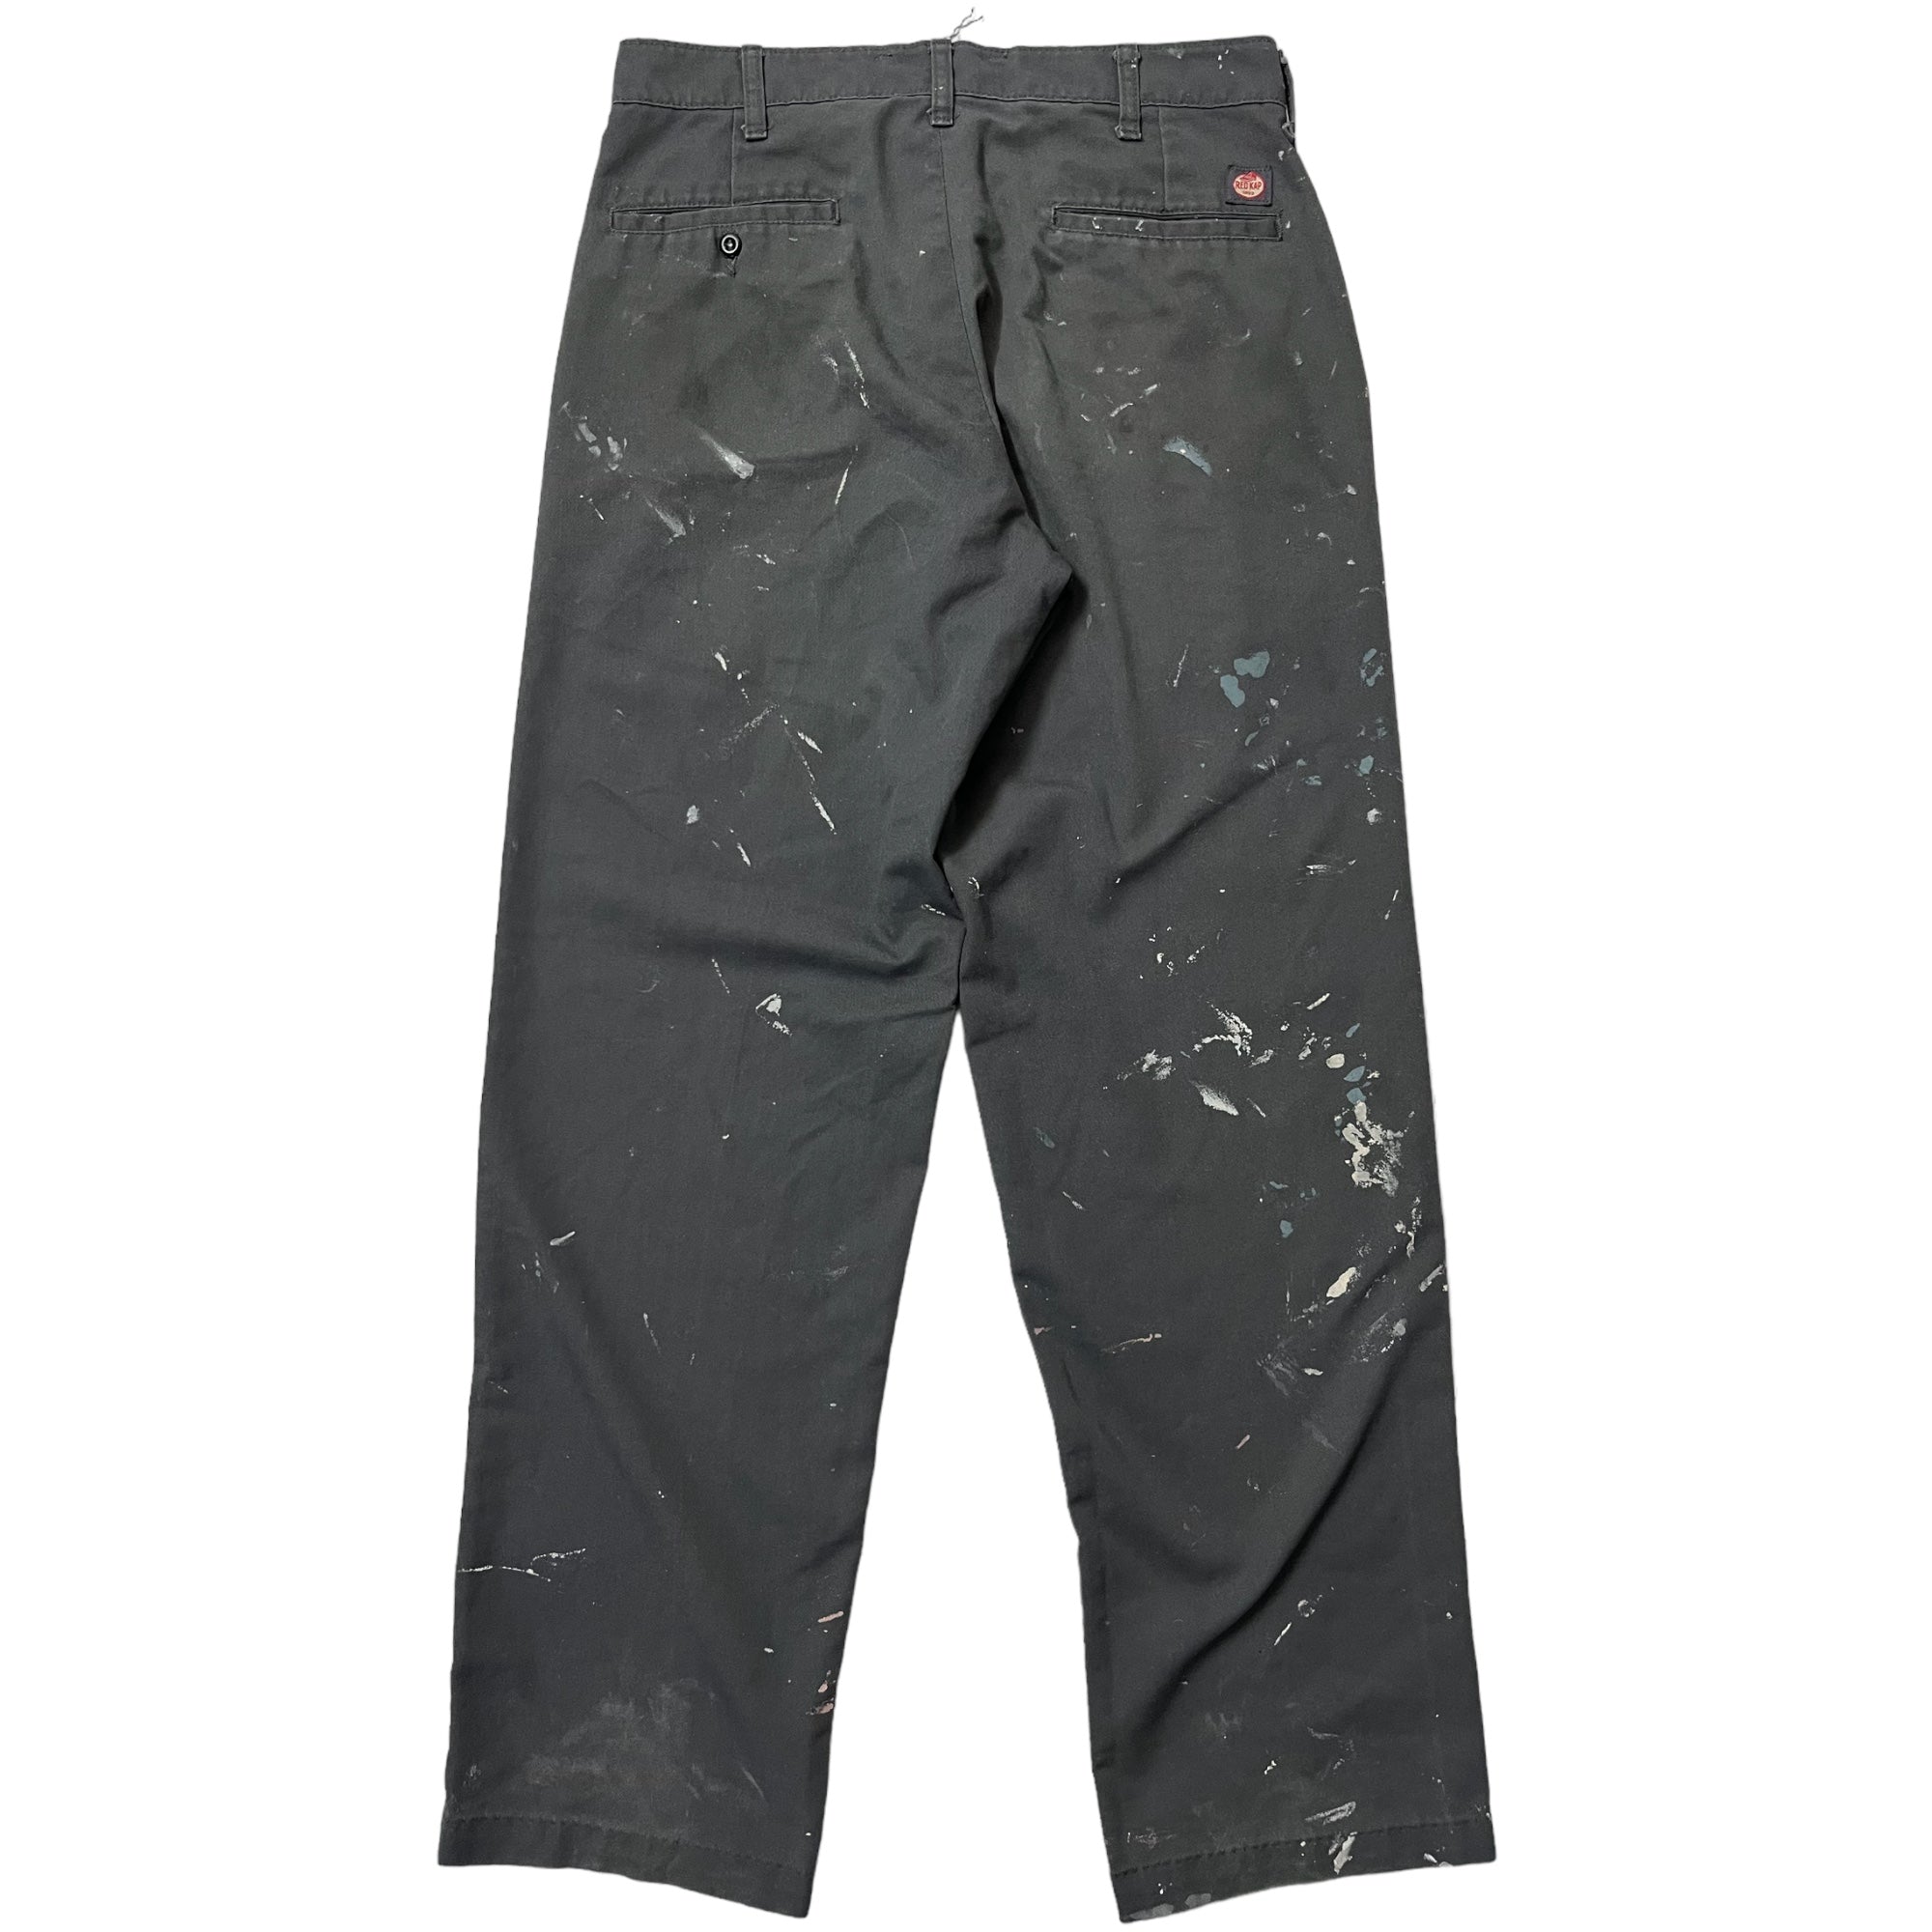 1980s Paint Distressed Red Kap Work Pants - Faded Black/Charcoal - 32x32